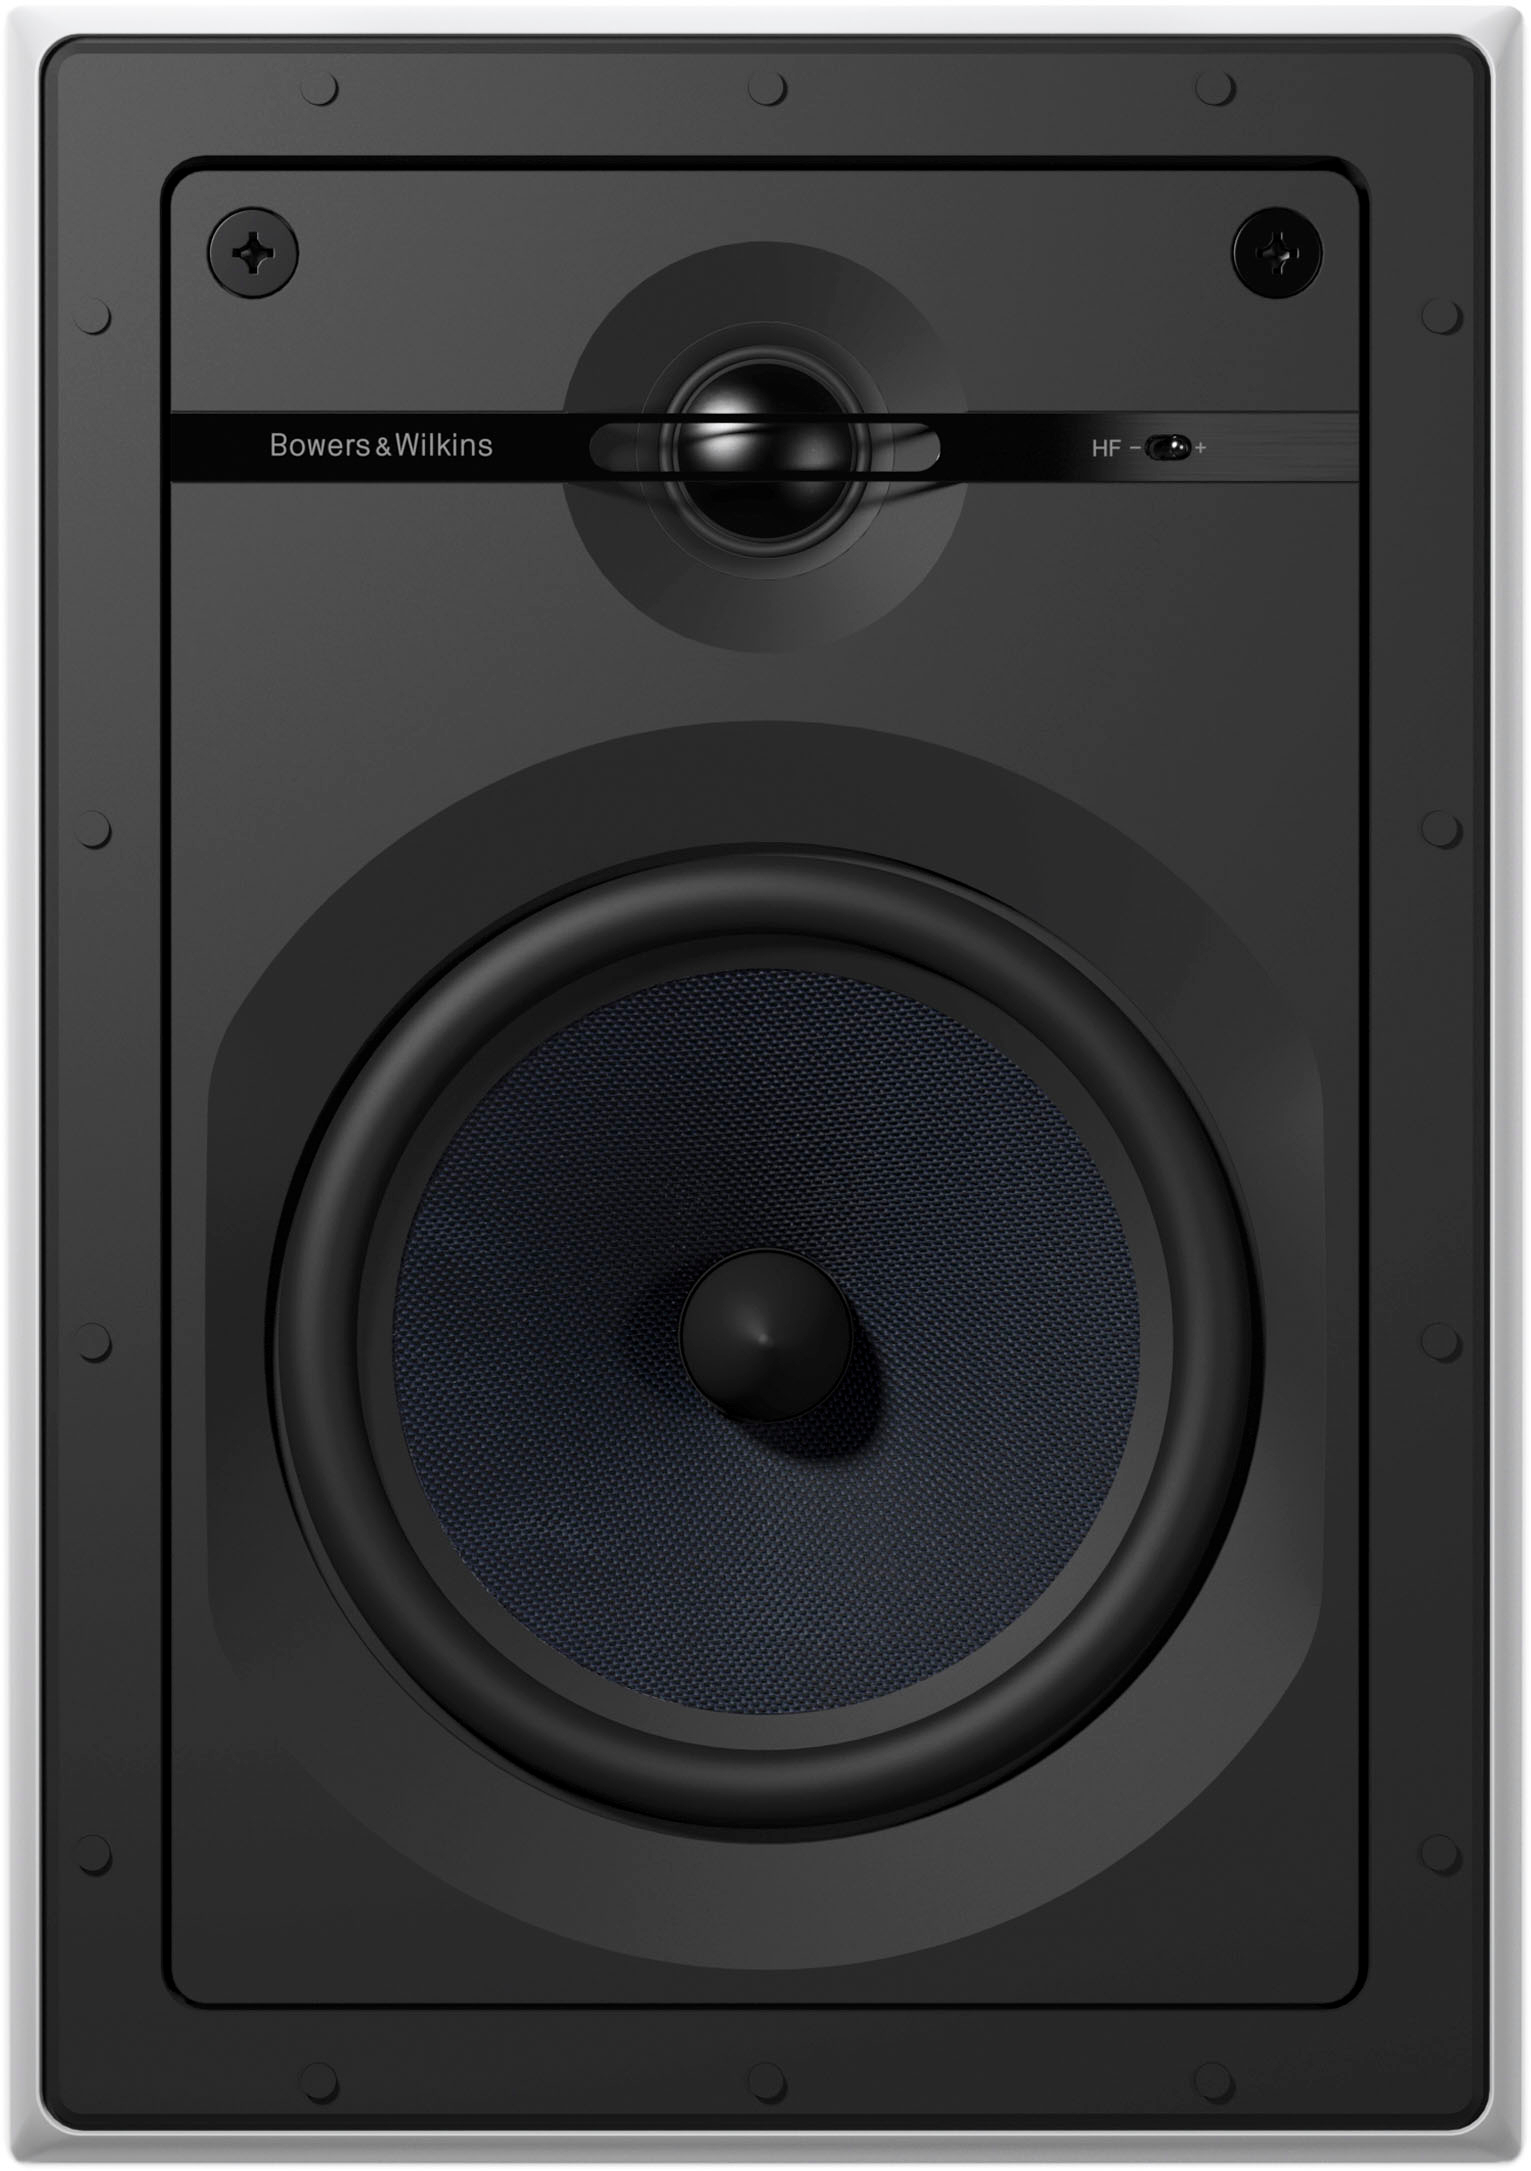 Angle View: Bowers & Wilkins - CI600 Series 6" In-Wall Speakers w/ Cast Basket, Aramid Fiber Midbass and Nautilus Tweeter - (Pair) - Paintable White